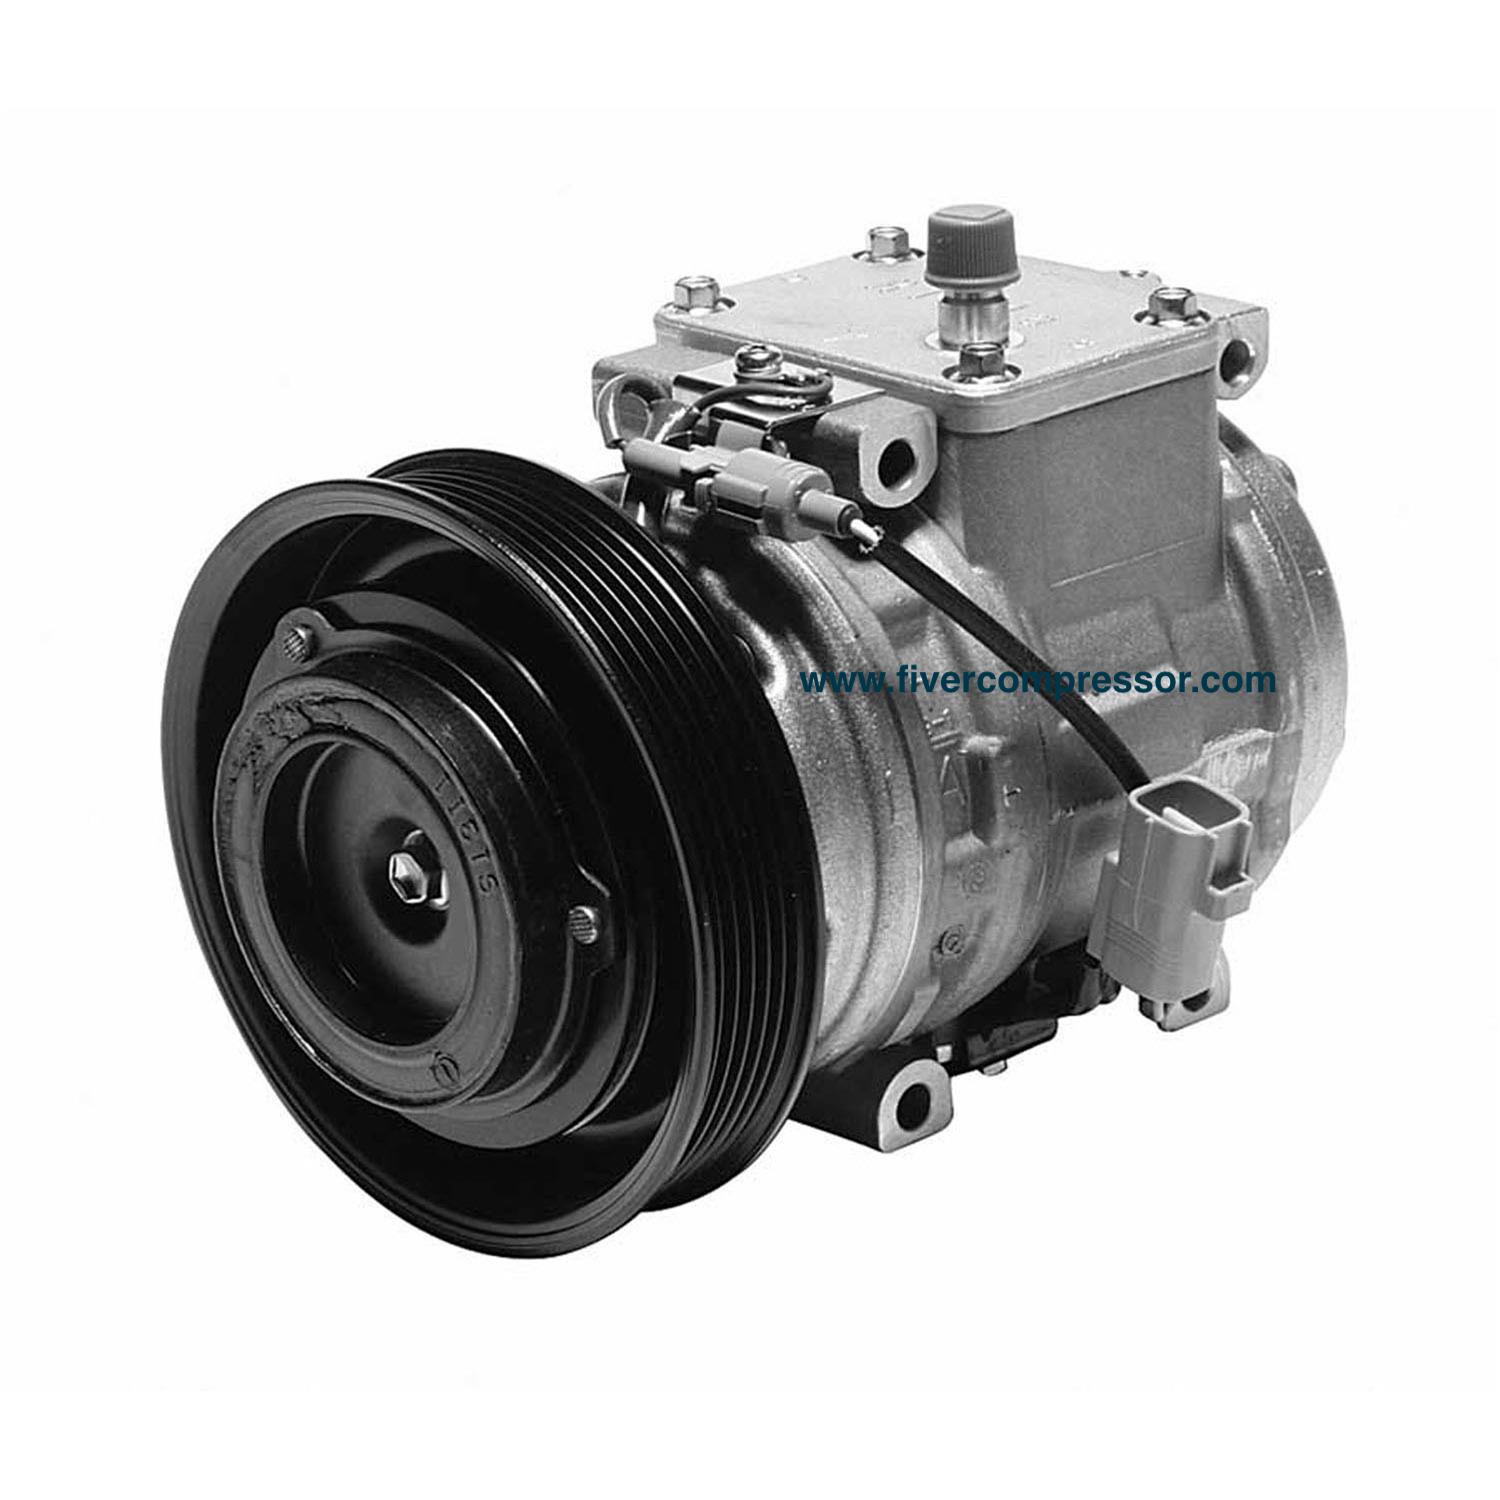 12V Type 10PA15C Auto AC Compressor 6PK 4711202, 8831002050, 8832002050 for Toyota <a href=http://www.fivercompressor.com/toyota-AC-compressor.html target='_blank'>Corolla</a> CE/LE/S/VE 1.8L 1998-2002